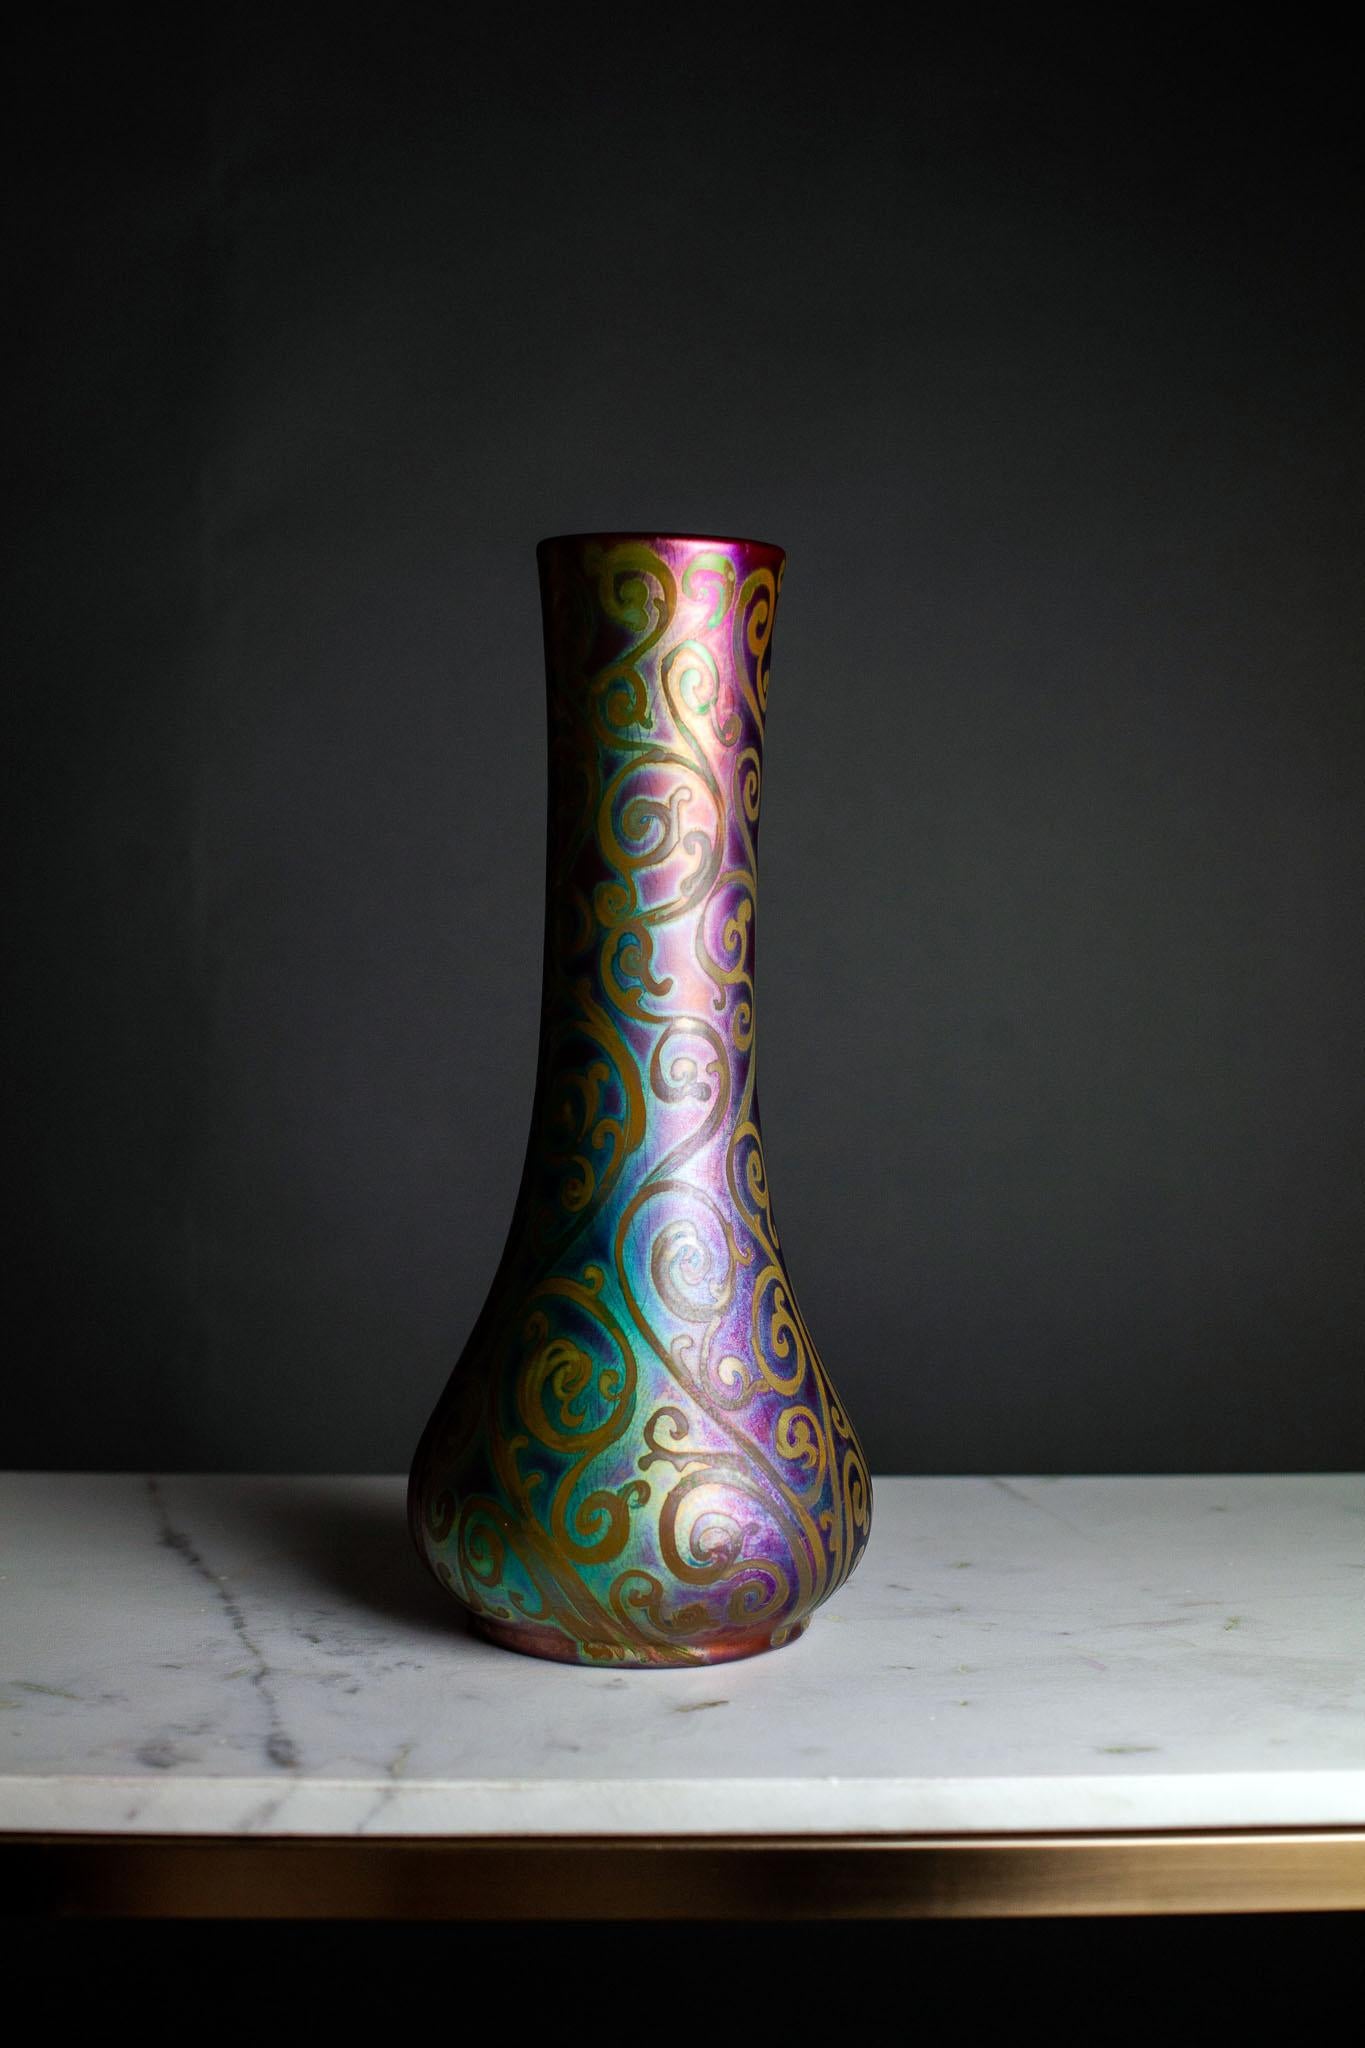 This Art Nouveau Jacques Sicard Vase for your consideration. 

From 1902-1907, Jacques Sicard worked at Weller Pottery (Zanesville, OH 1872-1948) to develop a metallic glaze, which had been introduced by Clement Massier in France in 1889, as